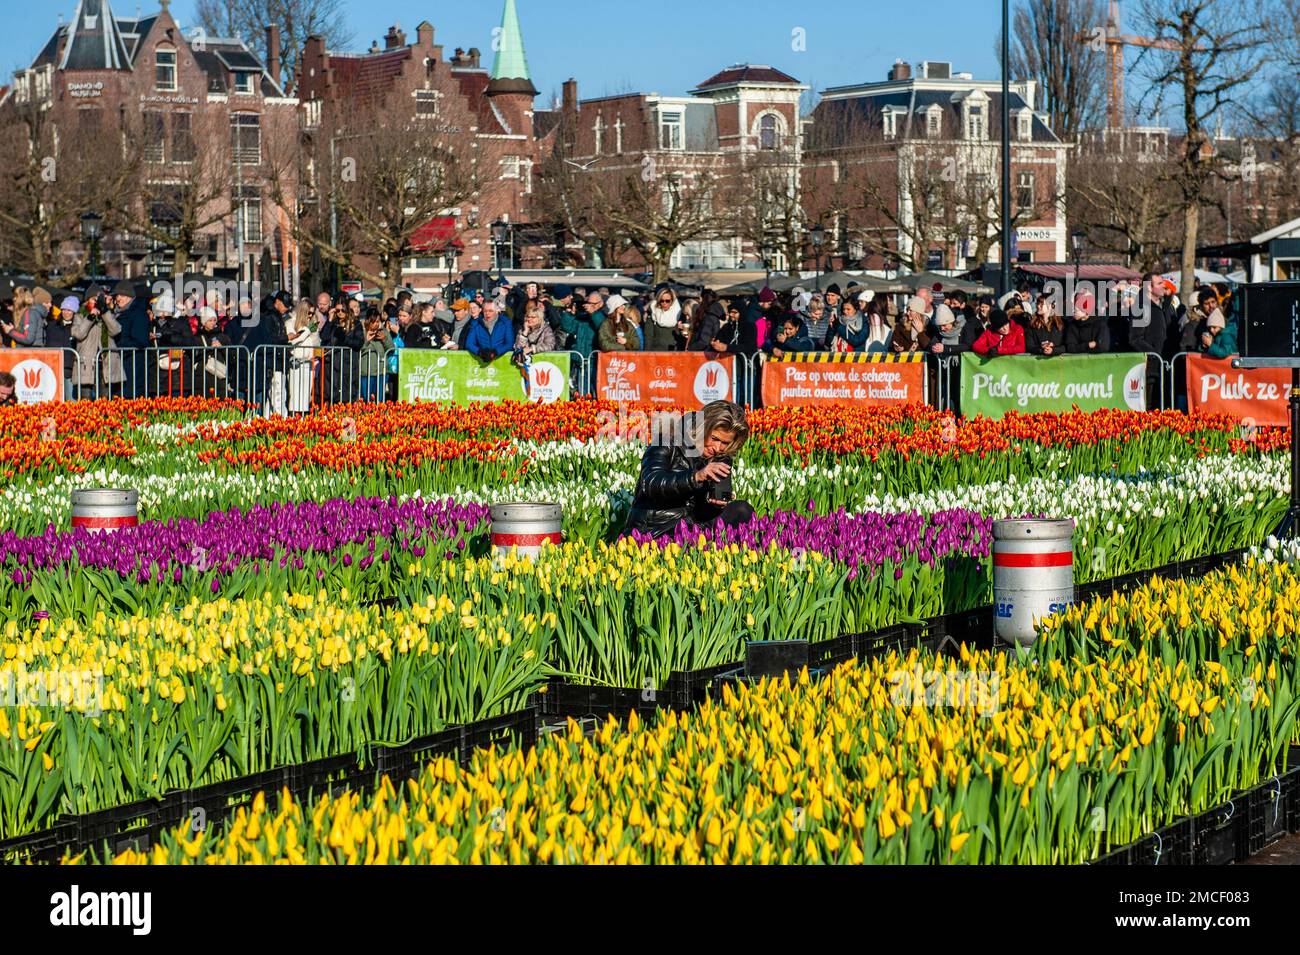 A woman seen taking a photo of the tulips. Each year on the 3rd Saturday of January, the National Tulip Day is celebrated in Amsterdam. Dutch tulip growers built a huge picking garden with more than 200,000 colorful tulips at the Museumplein in Amsterdam. Visitors are allowed to pick tulips for free. The event was opened by Olympic skating champion, Irene Schouten. Prior to the opening, she christened a new tulip: Tulipa 'Dutch Pearl' as a reference to the world - famous painting 'The girl with a pearl earring' by Johannes Vermeer. (Photo by Ana Fernandez/SOPA Images/Sipa USA) Stock Photo